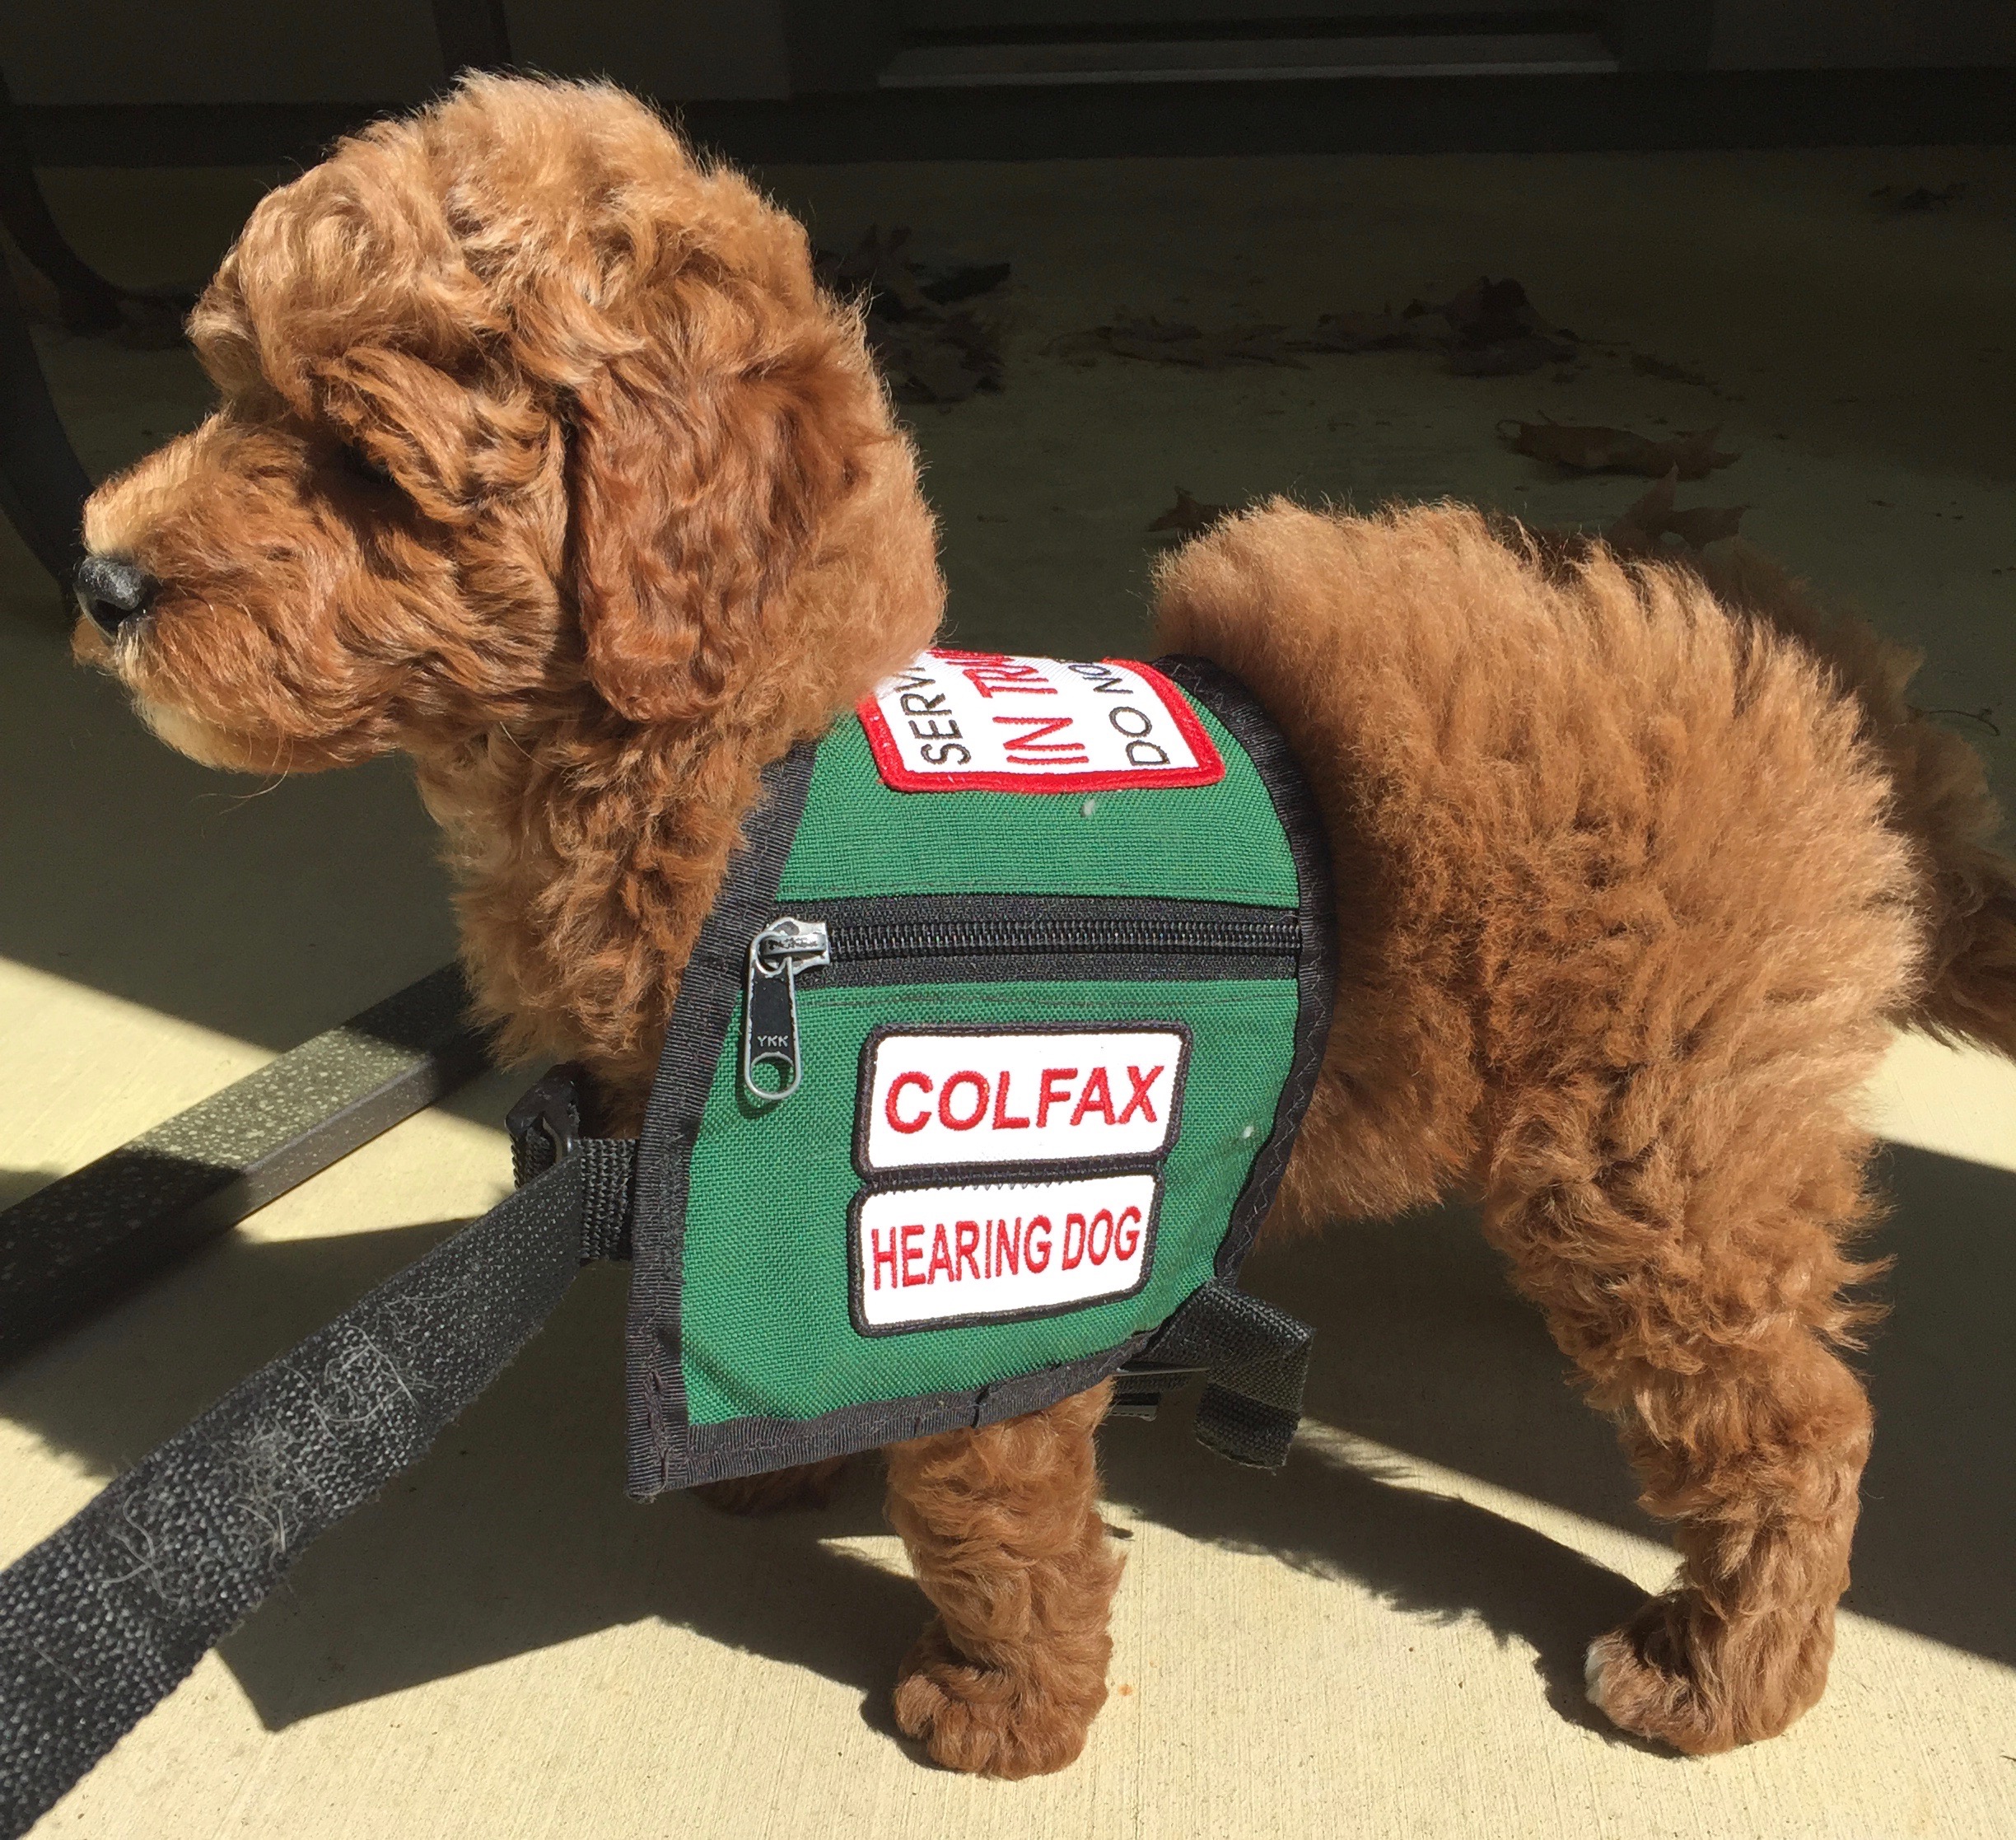 What happened when I tried to train my own service dog